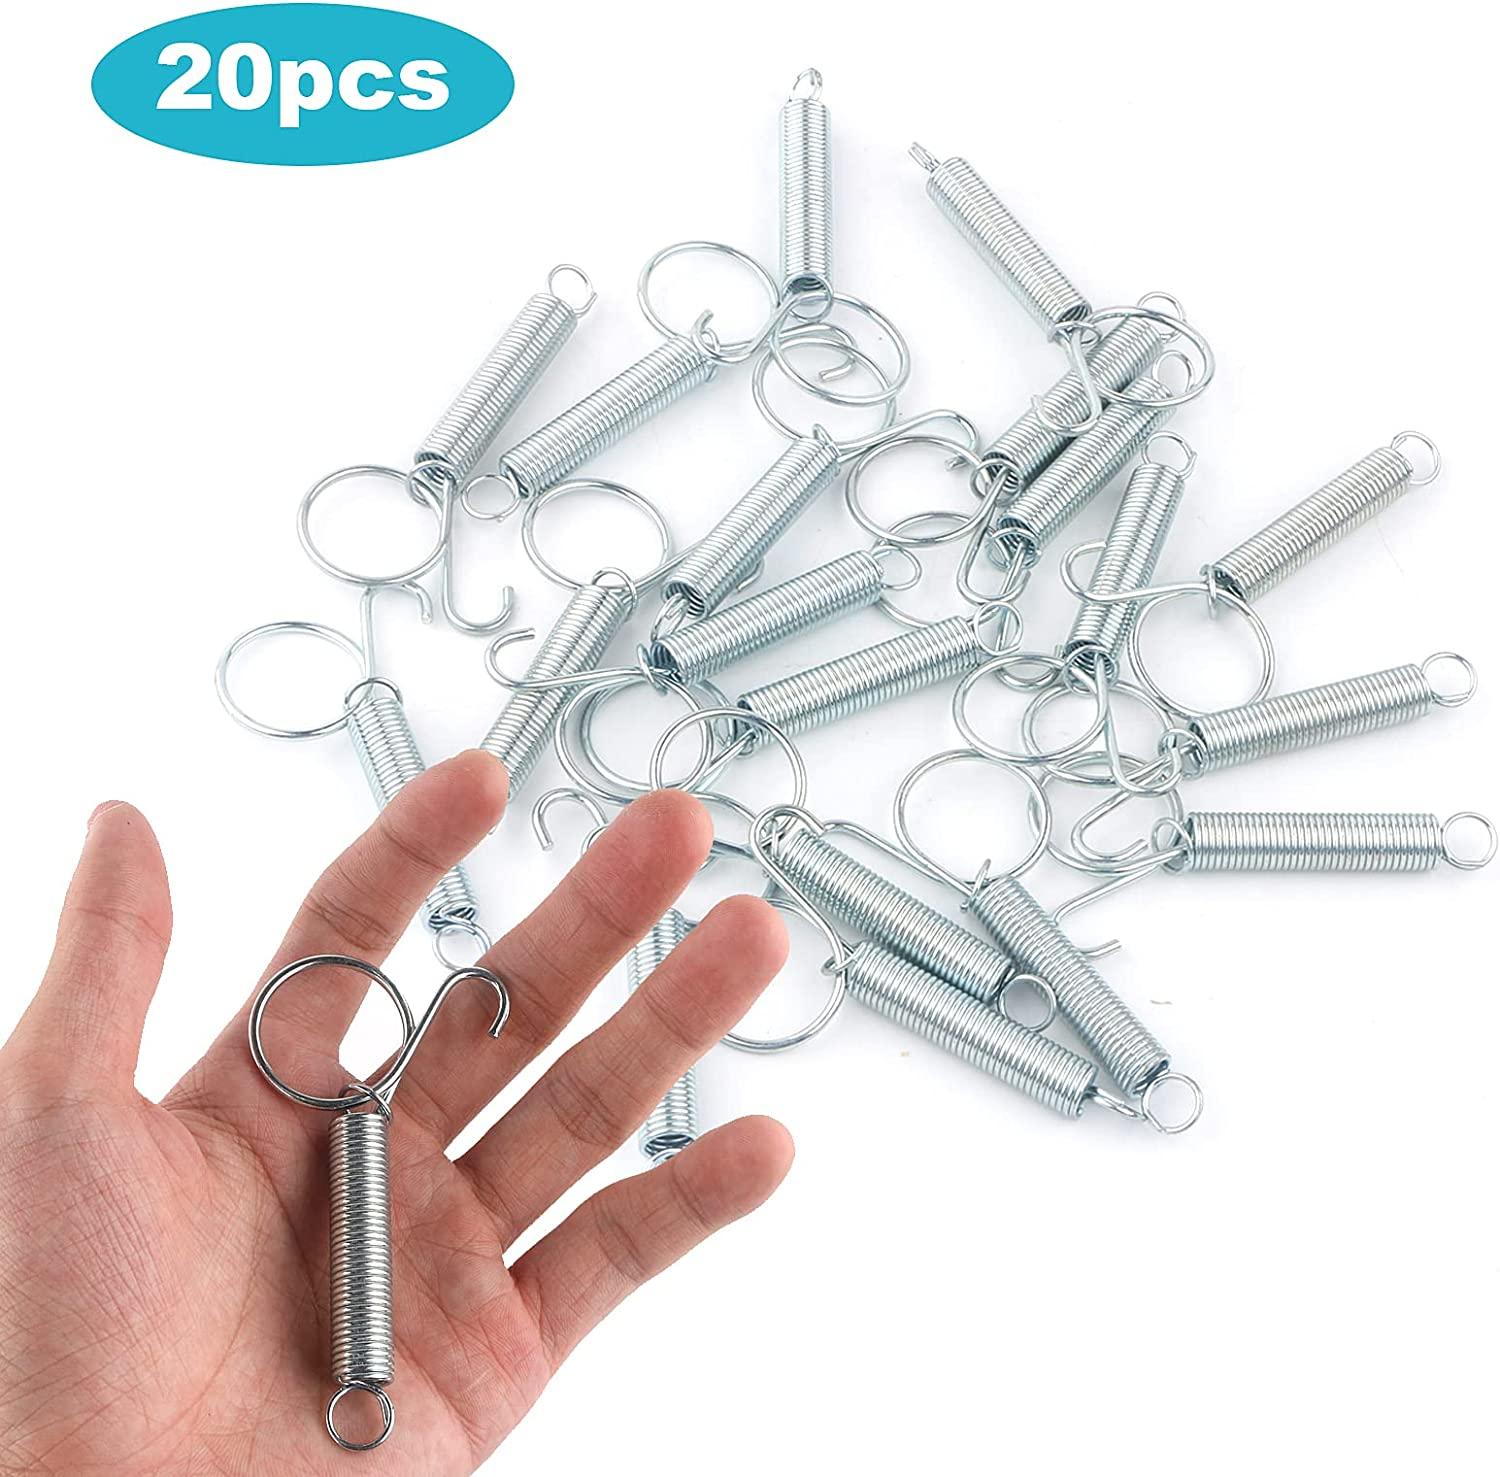 HOSUKKO 30pcs Trigger Snap Hooks, 360 Degree Swivel Spring Buckle Metal Swivel Clips Heavy Duty Snaps Hook for Pet Cages Chains